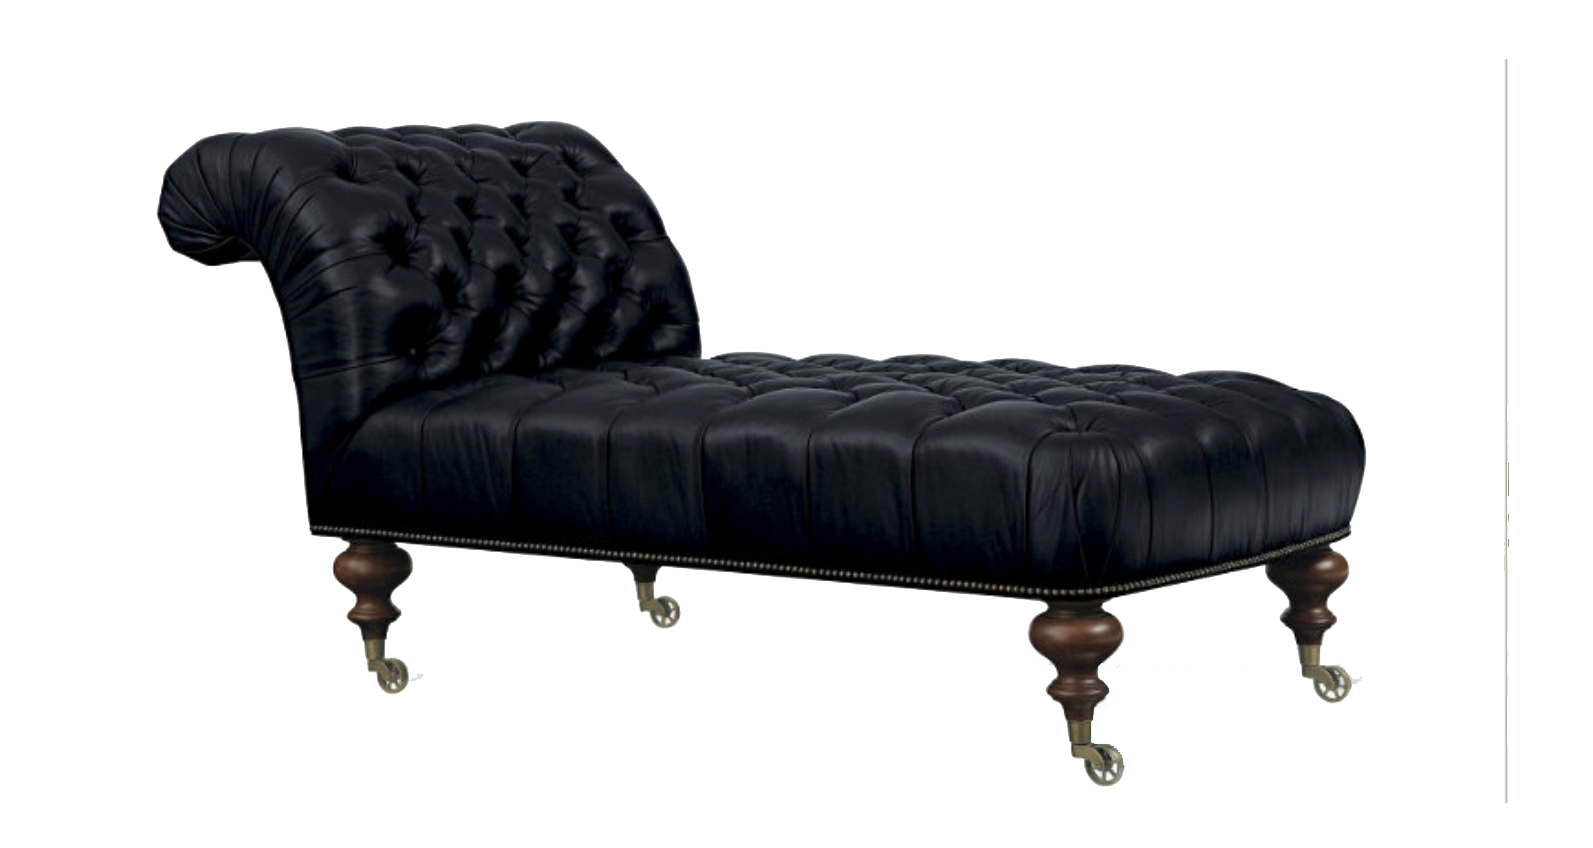 Chair Bed PNG HD File pngteam.com